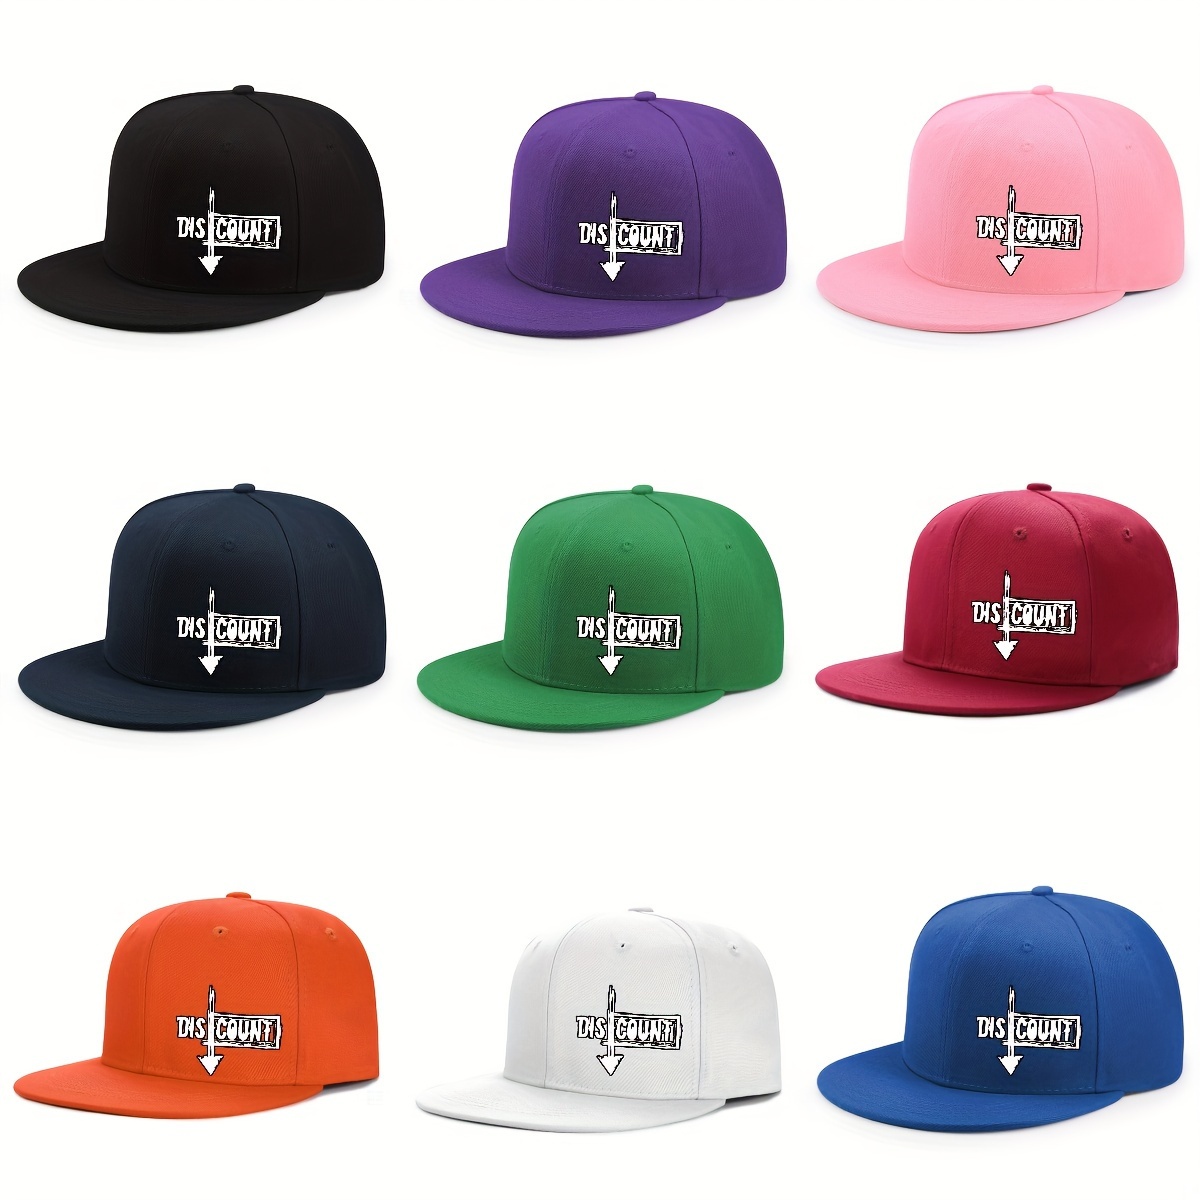 

9 Pcs Adjustable Street Style Baseball Caps - Summer Collection - City Theme - Uv Protection - 1 Size Fits All